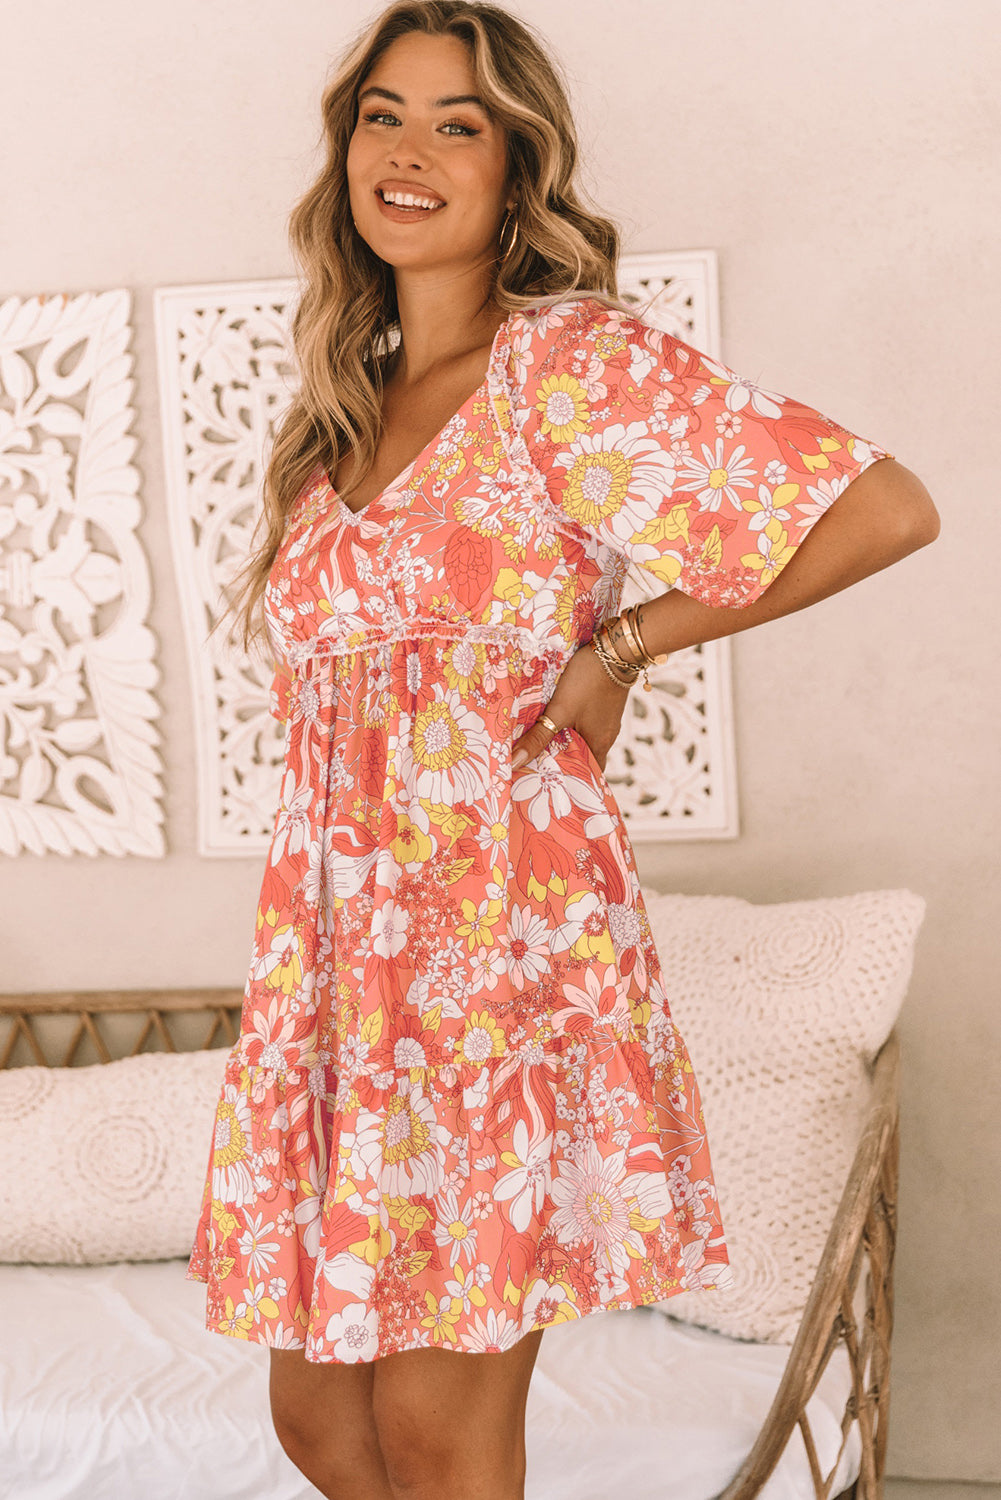 Chic Robe Fleurie Larges Manches Flottantes